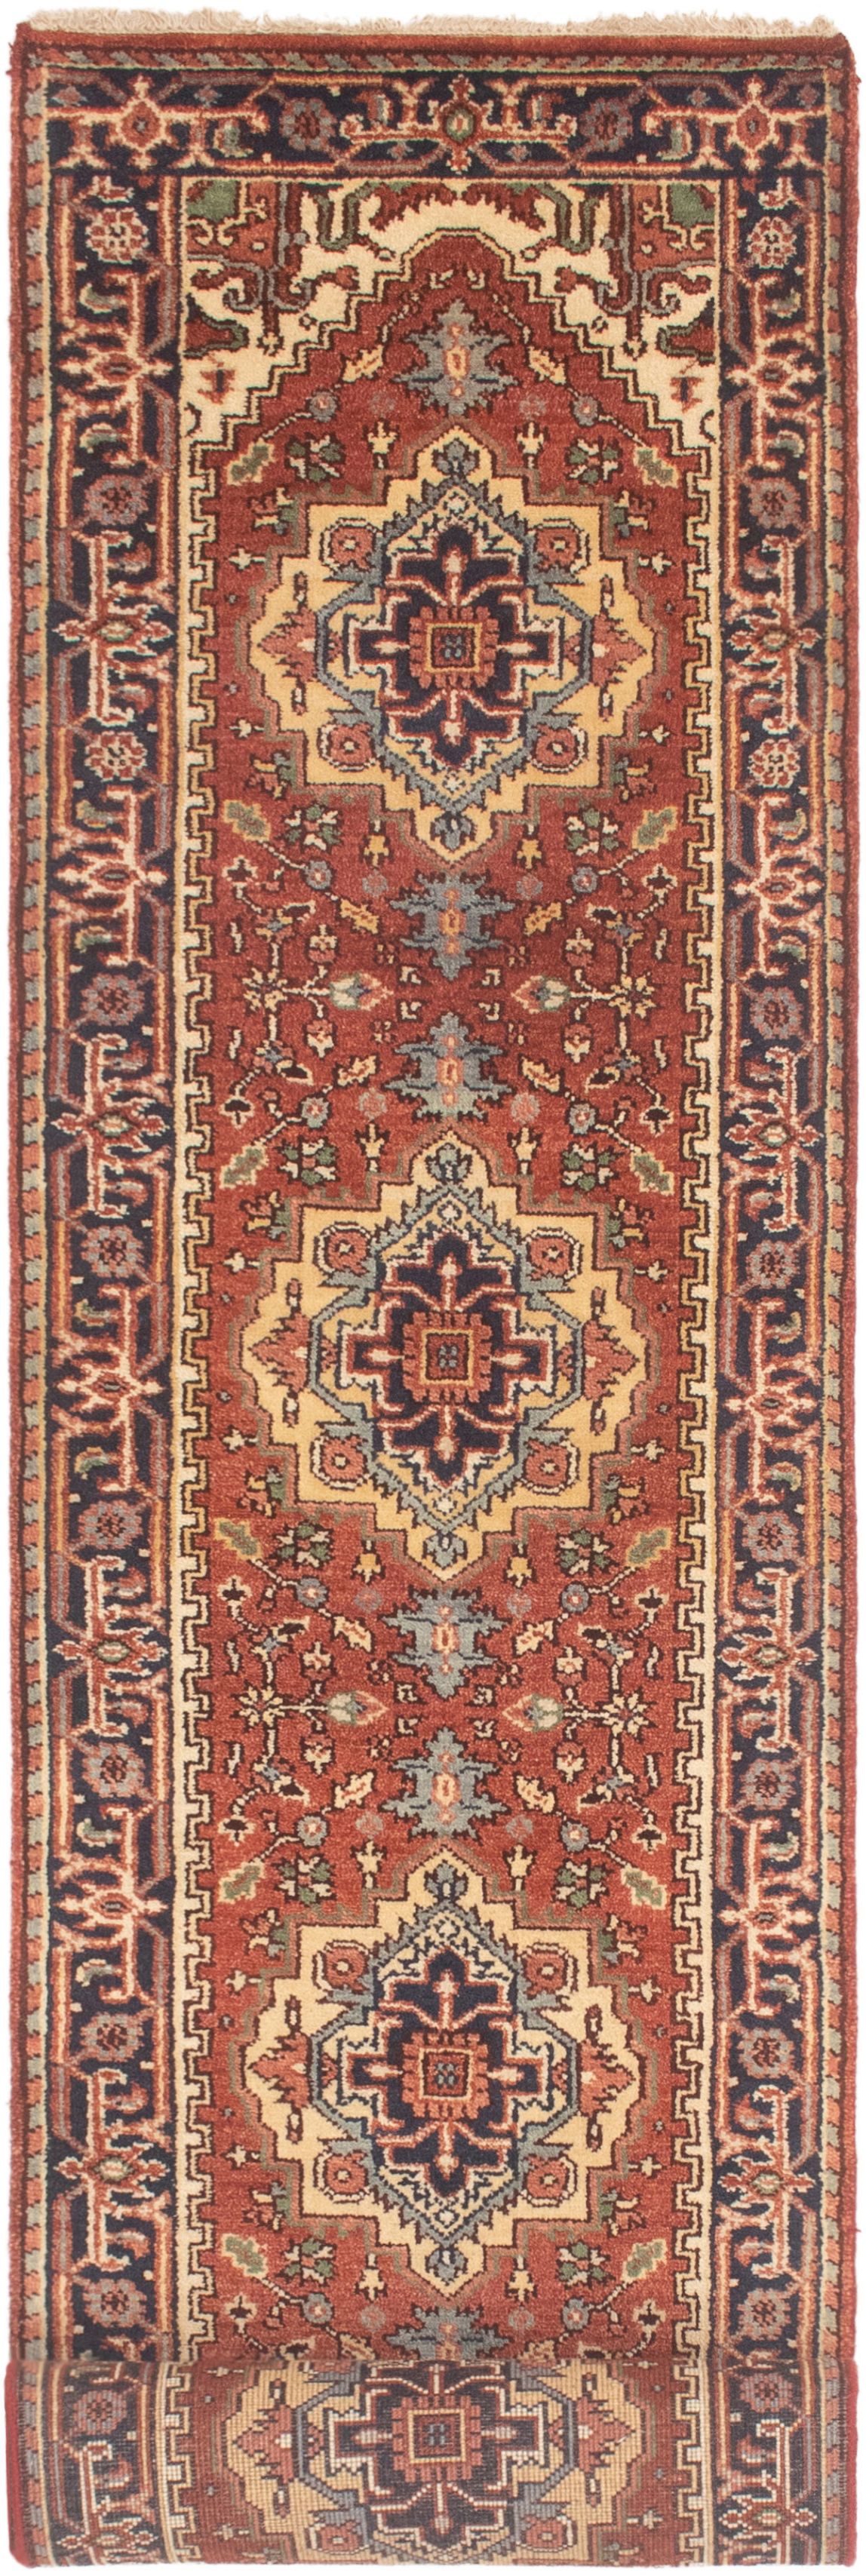 Hand-knotted Serapi Heritage Dark Copper Wool Rug 2'7" x 15'11"  Size: 2'7" x 15'11"  